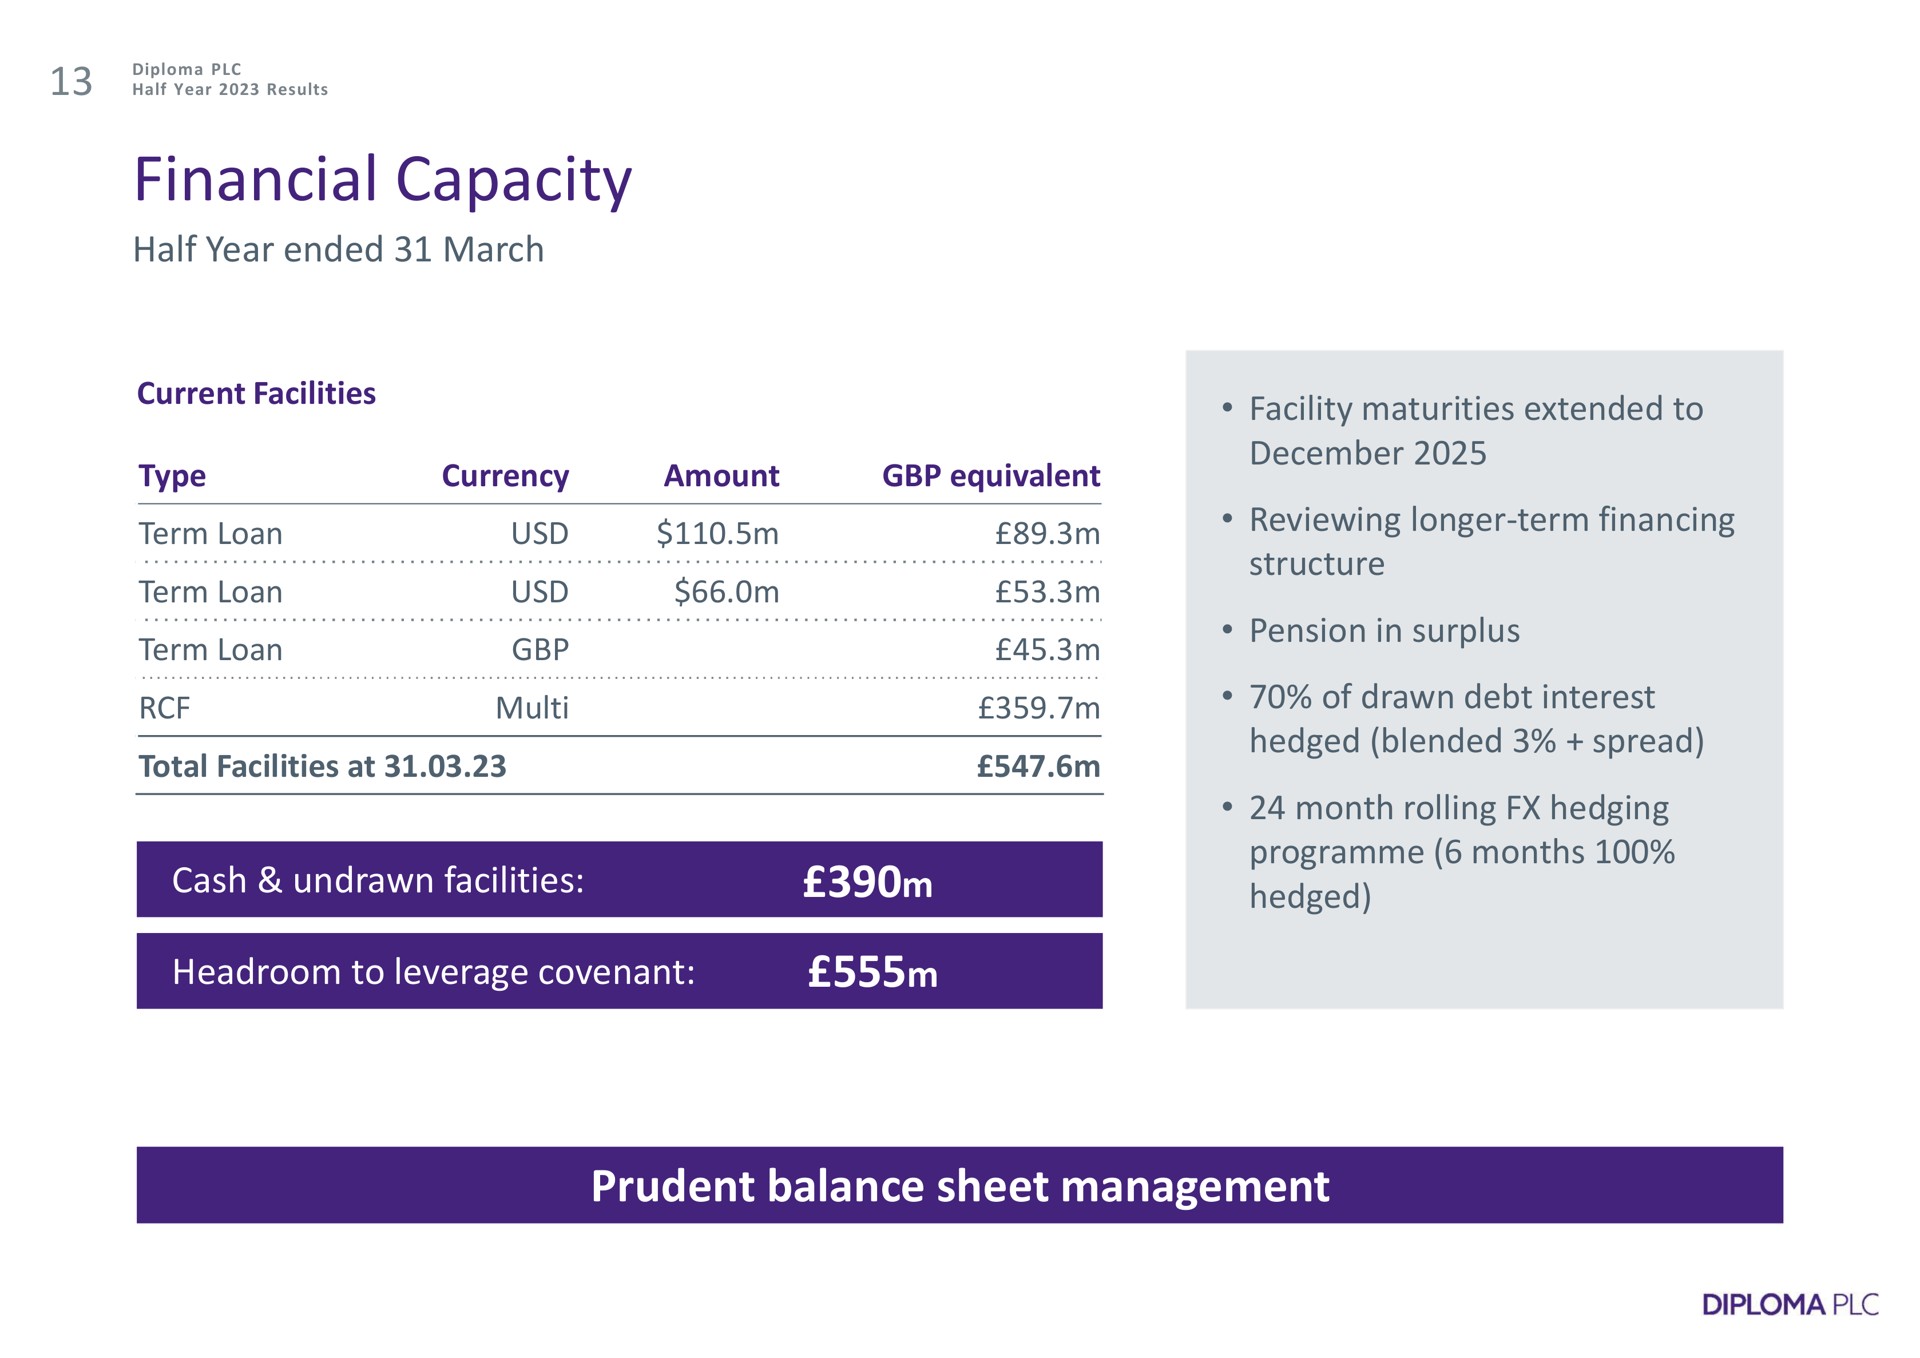 financial capacity half year ended march cash undrawn facilities headroom to leverage covenant prudent balance sheet management a hedged blended spread | Diploma